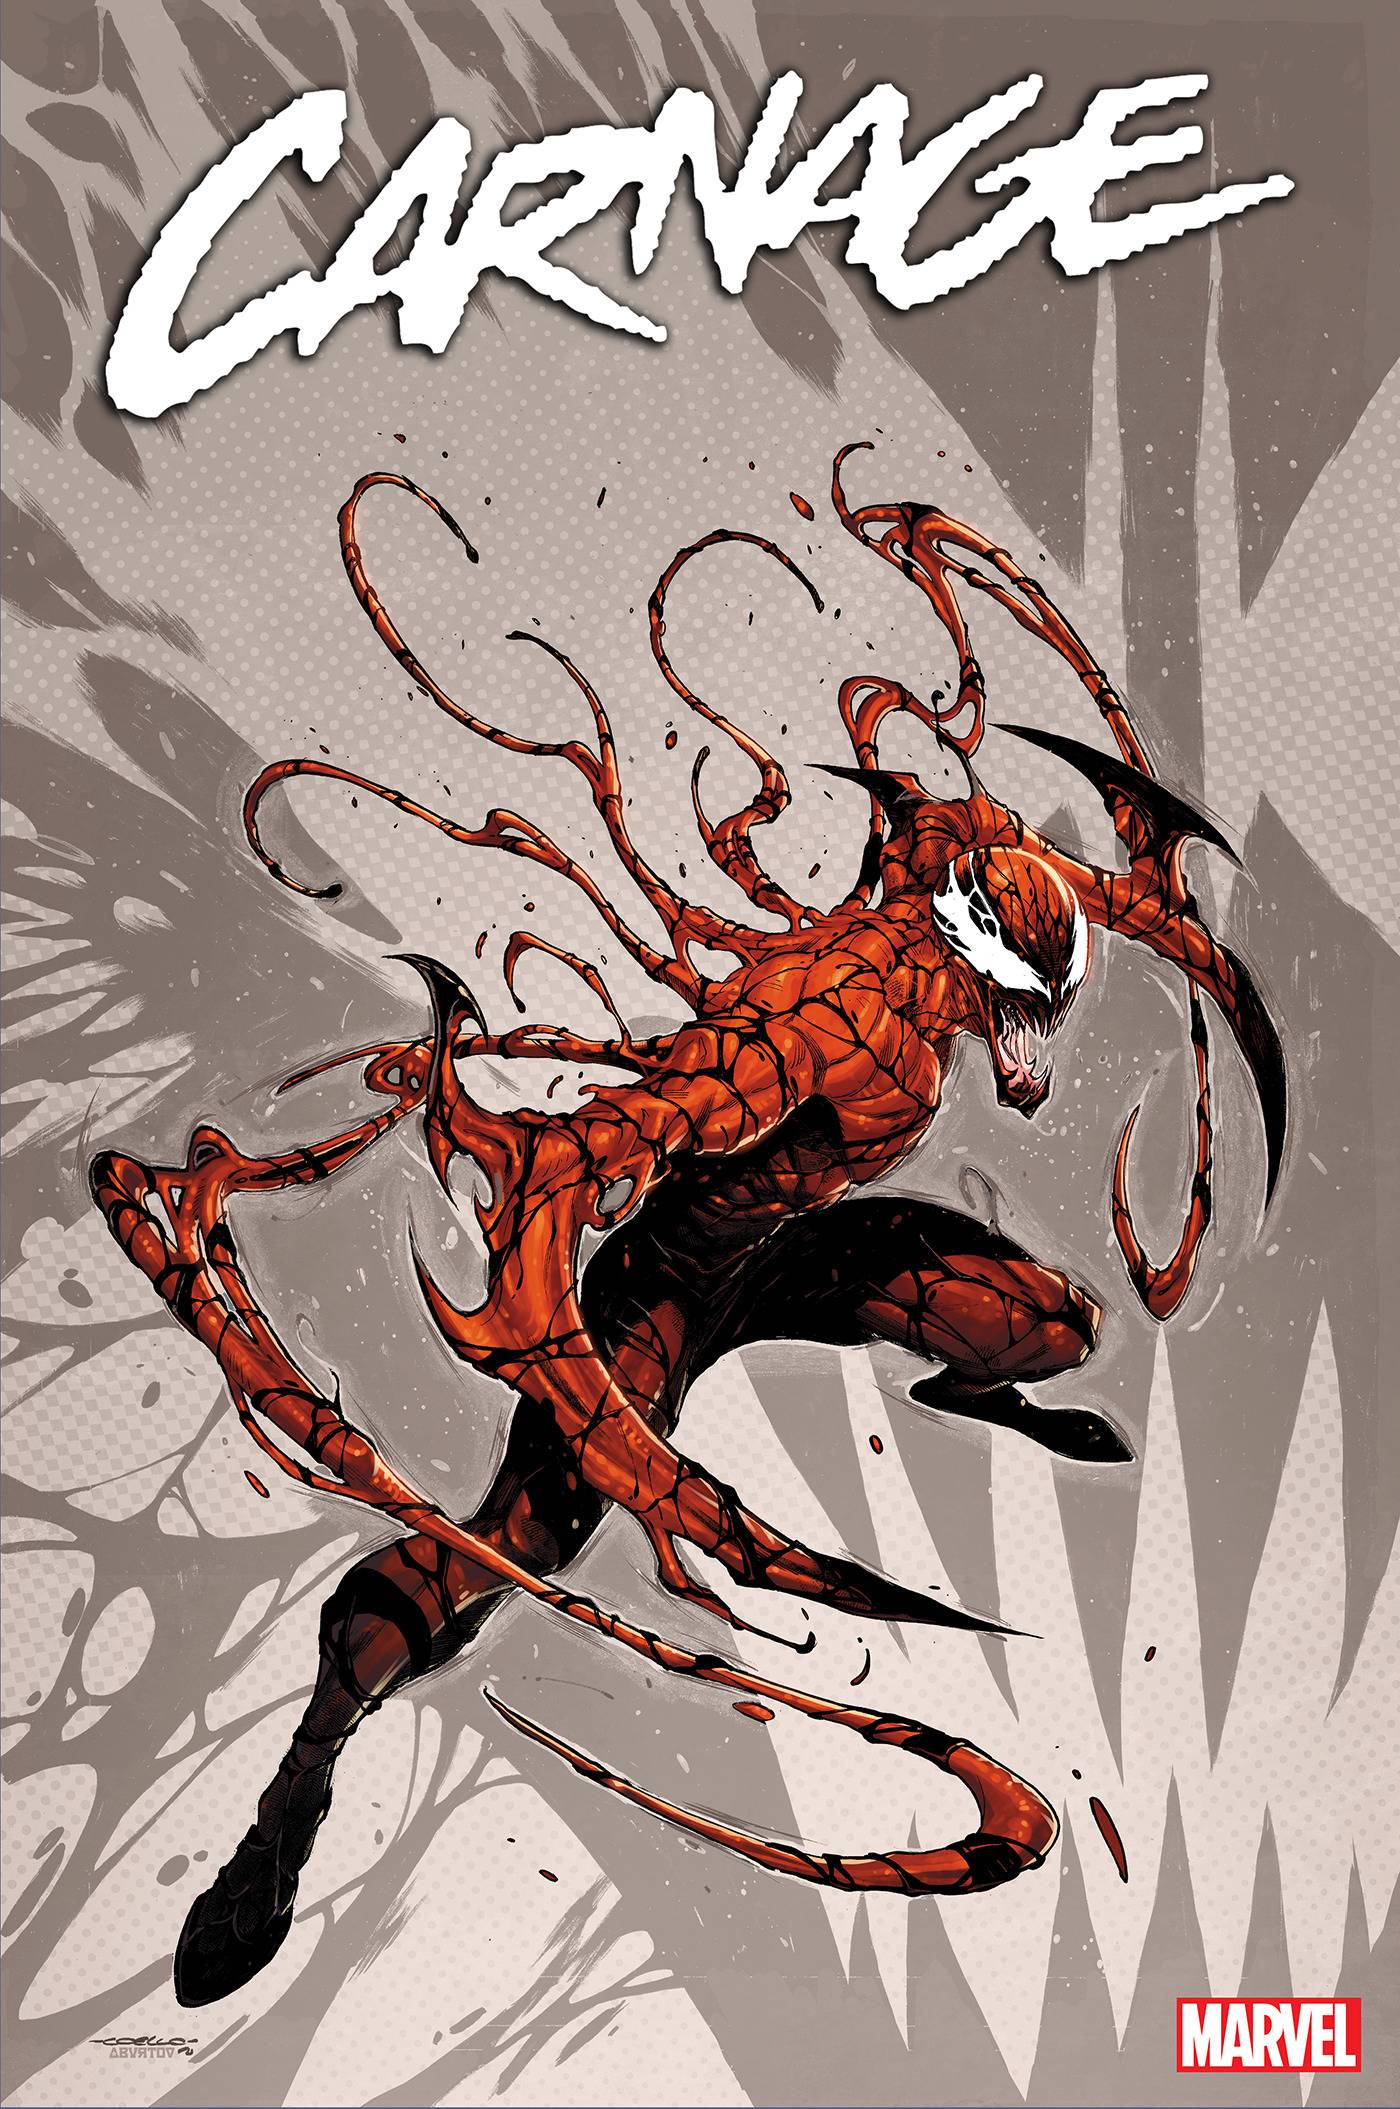 04/27/2022 CARNAGE #2 COELLO STORMBREAKERS VARIANT